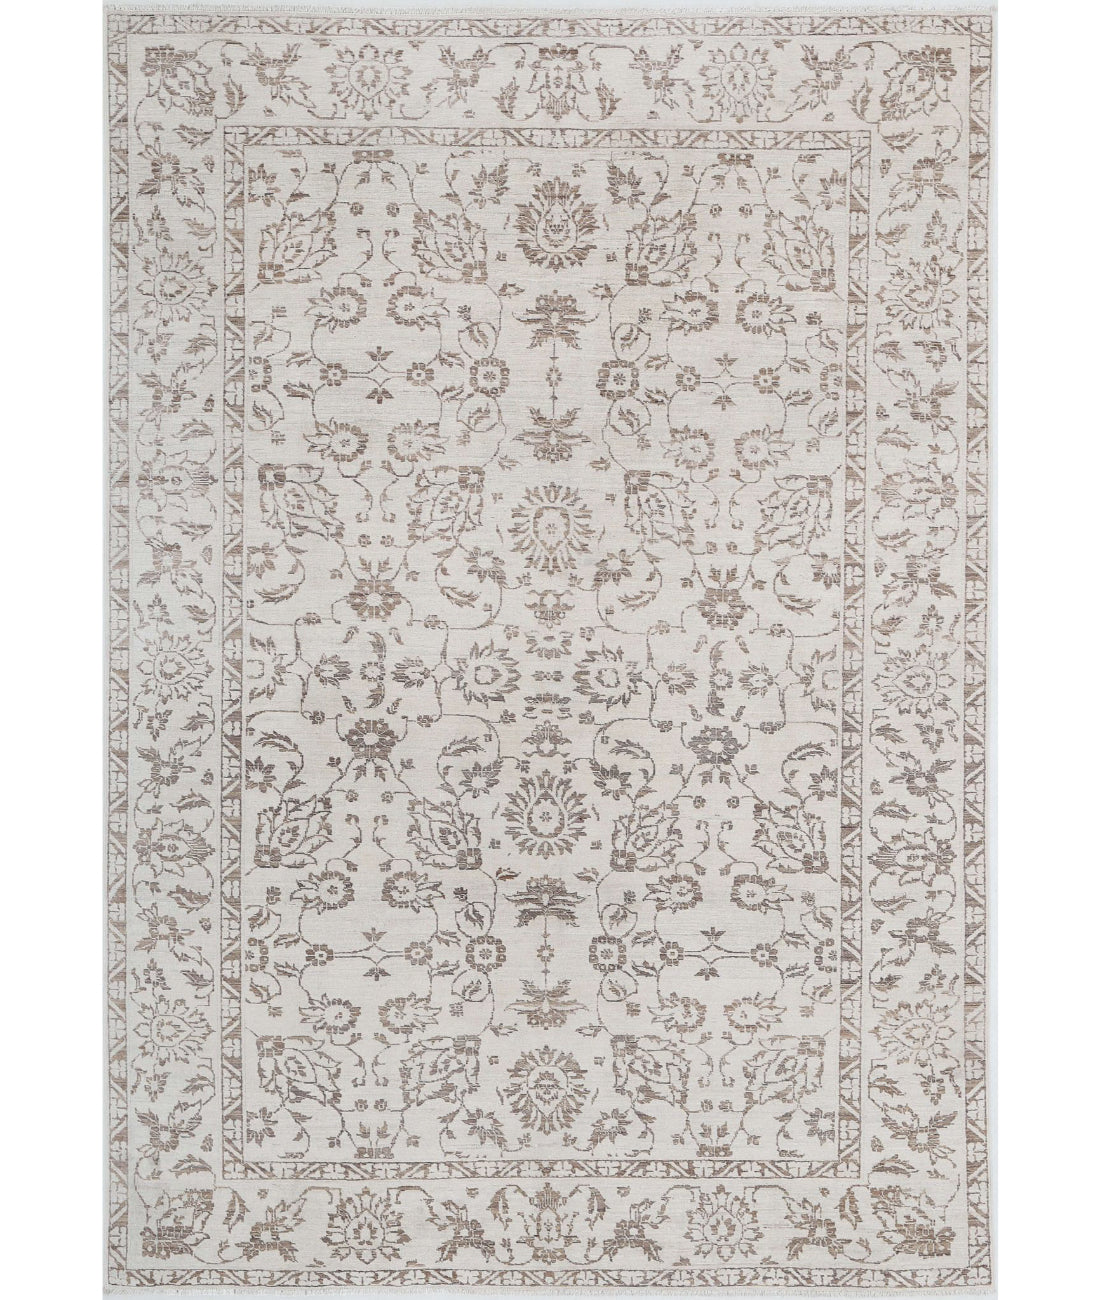 Hand Knotted Serenity Wool Rug - 5'9'' x 8'4'' 5'9'' x 8'4'' (173 X 250) / Grey / Grey